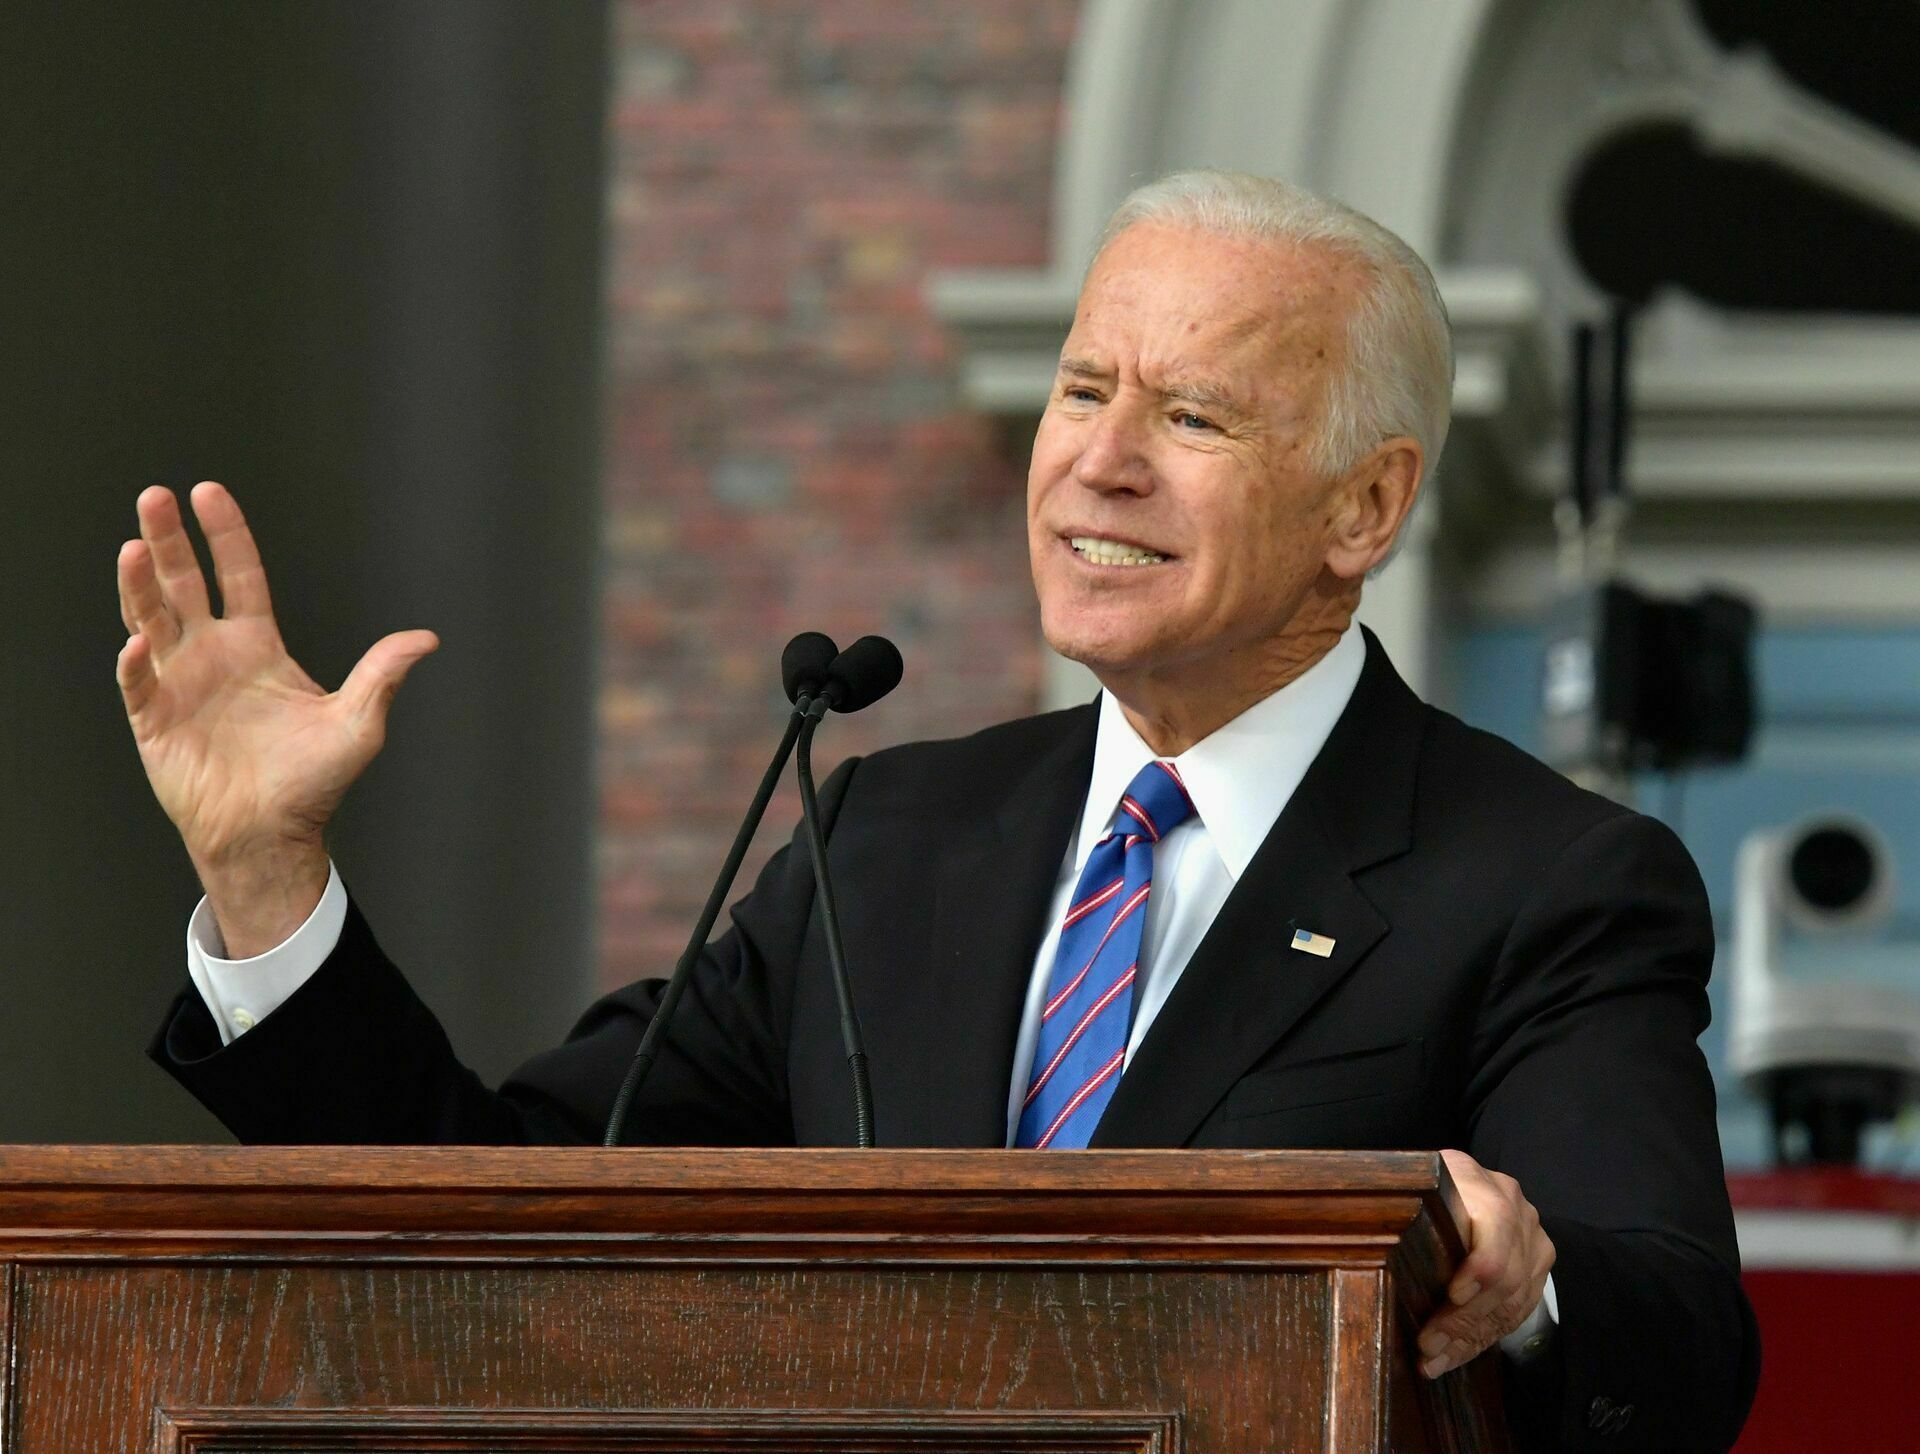 Joe Biden is the first in US history to get 80 million votes in the presidential election